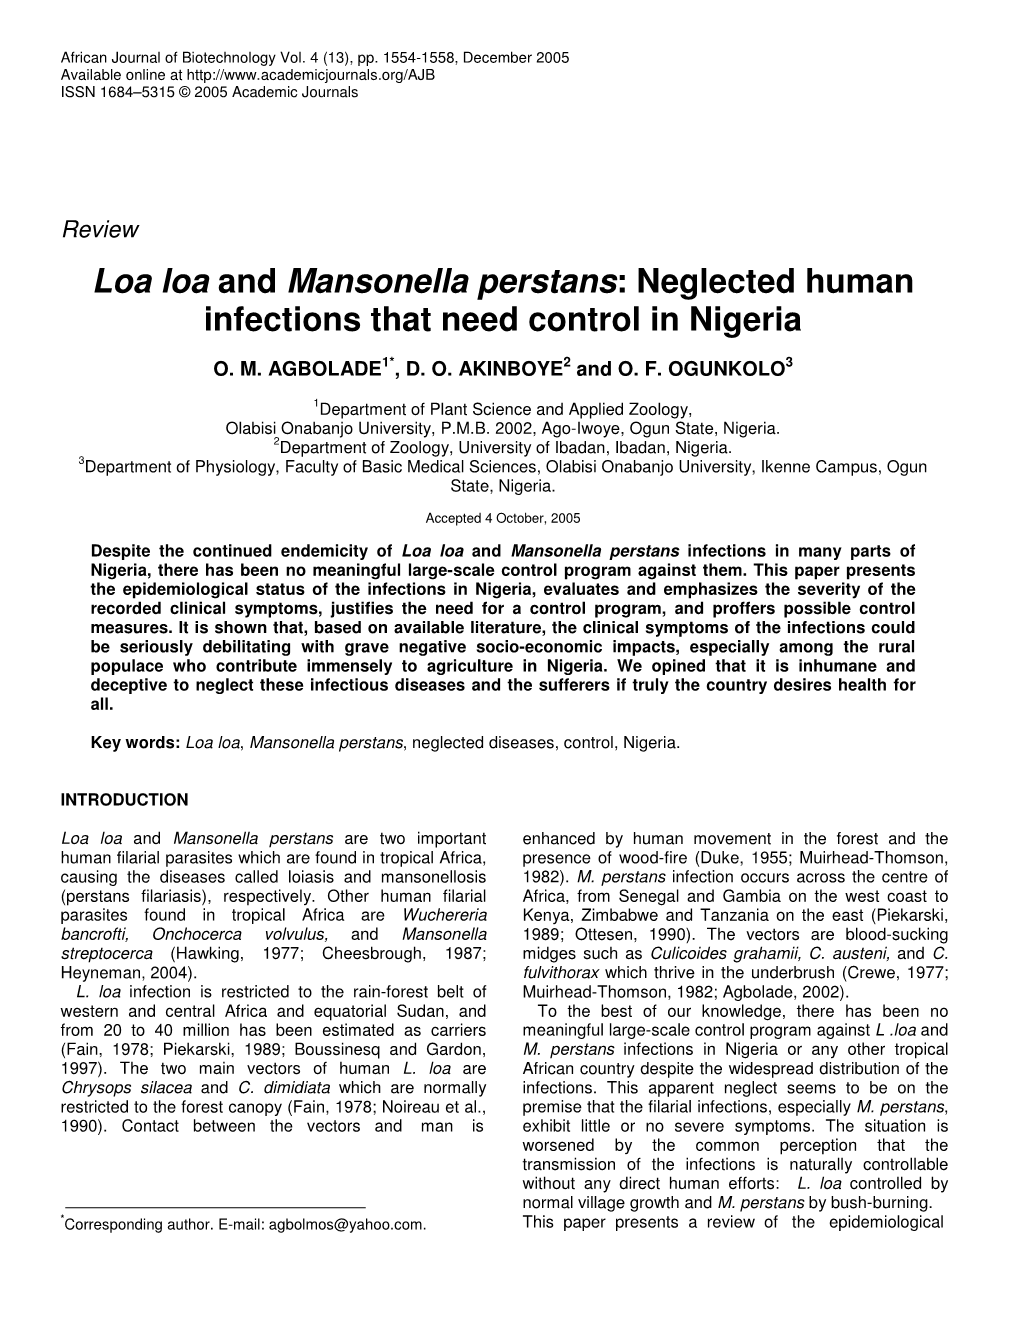 Loa Loa and Mansonella Perstans: Neglected Human Infections That Need Control in Nigeria